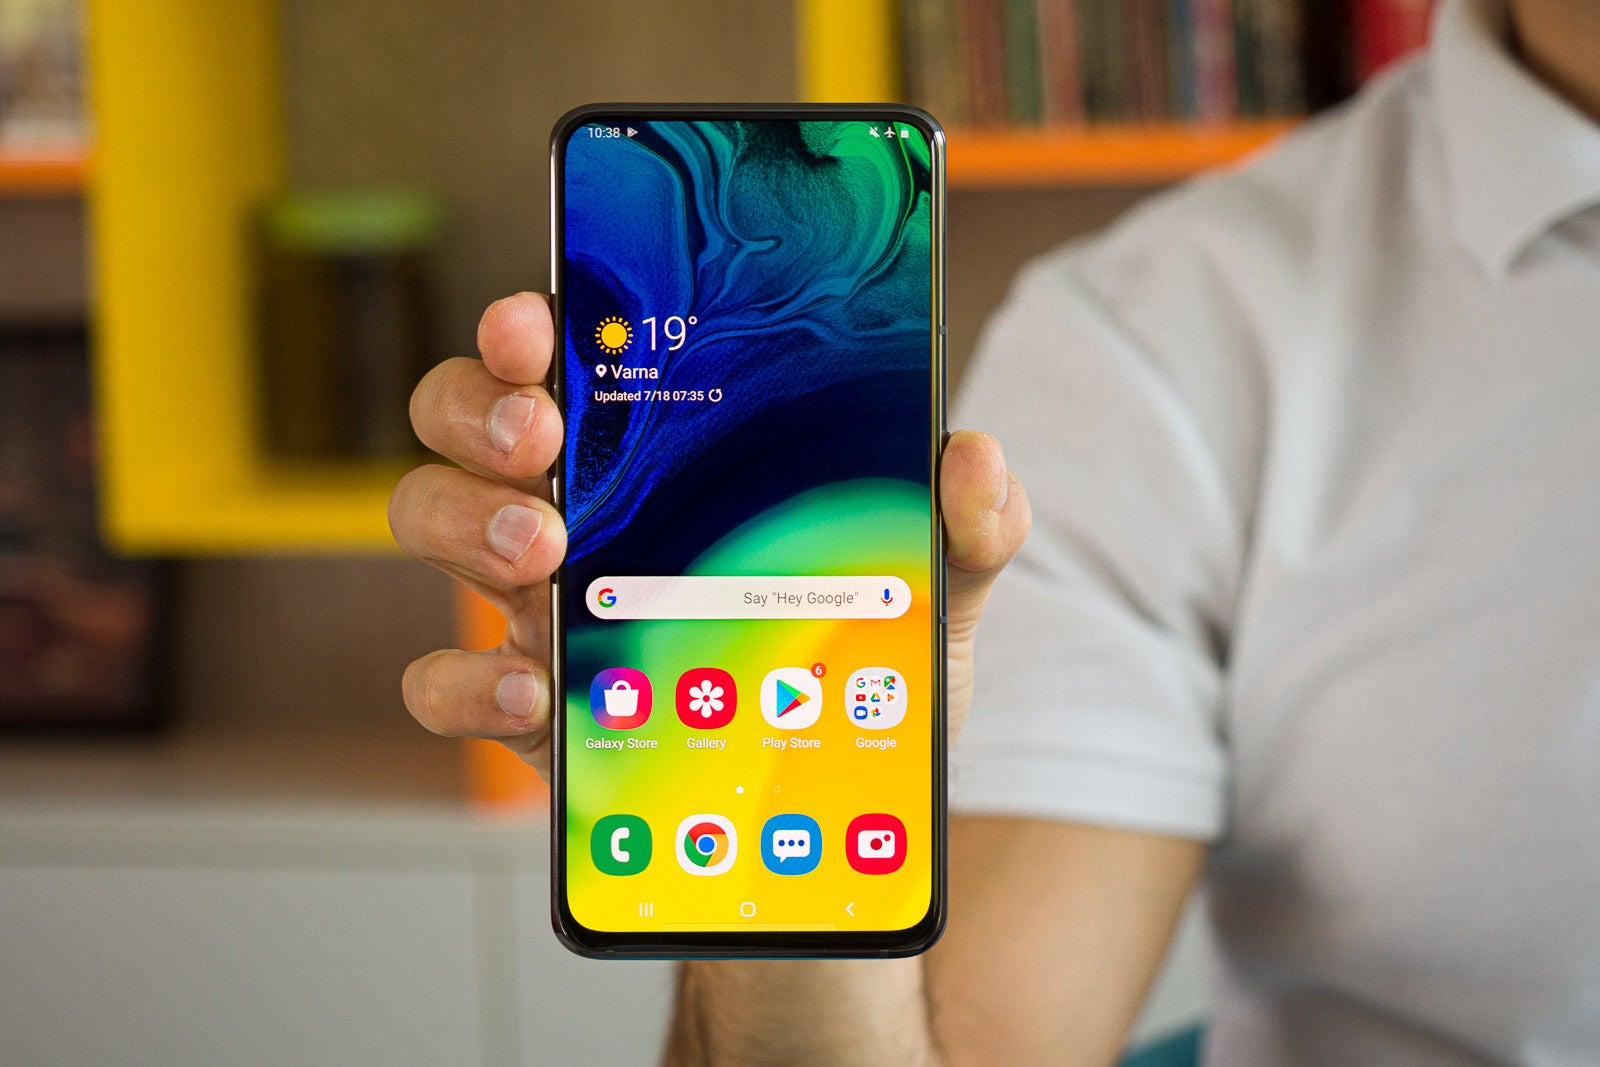 Samsung Galaxy A80 - Here's what Samsung's notch could soon look like